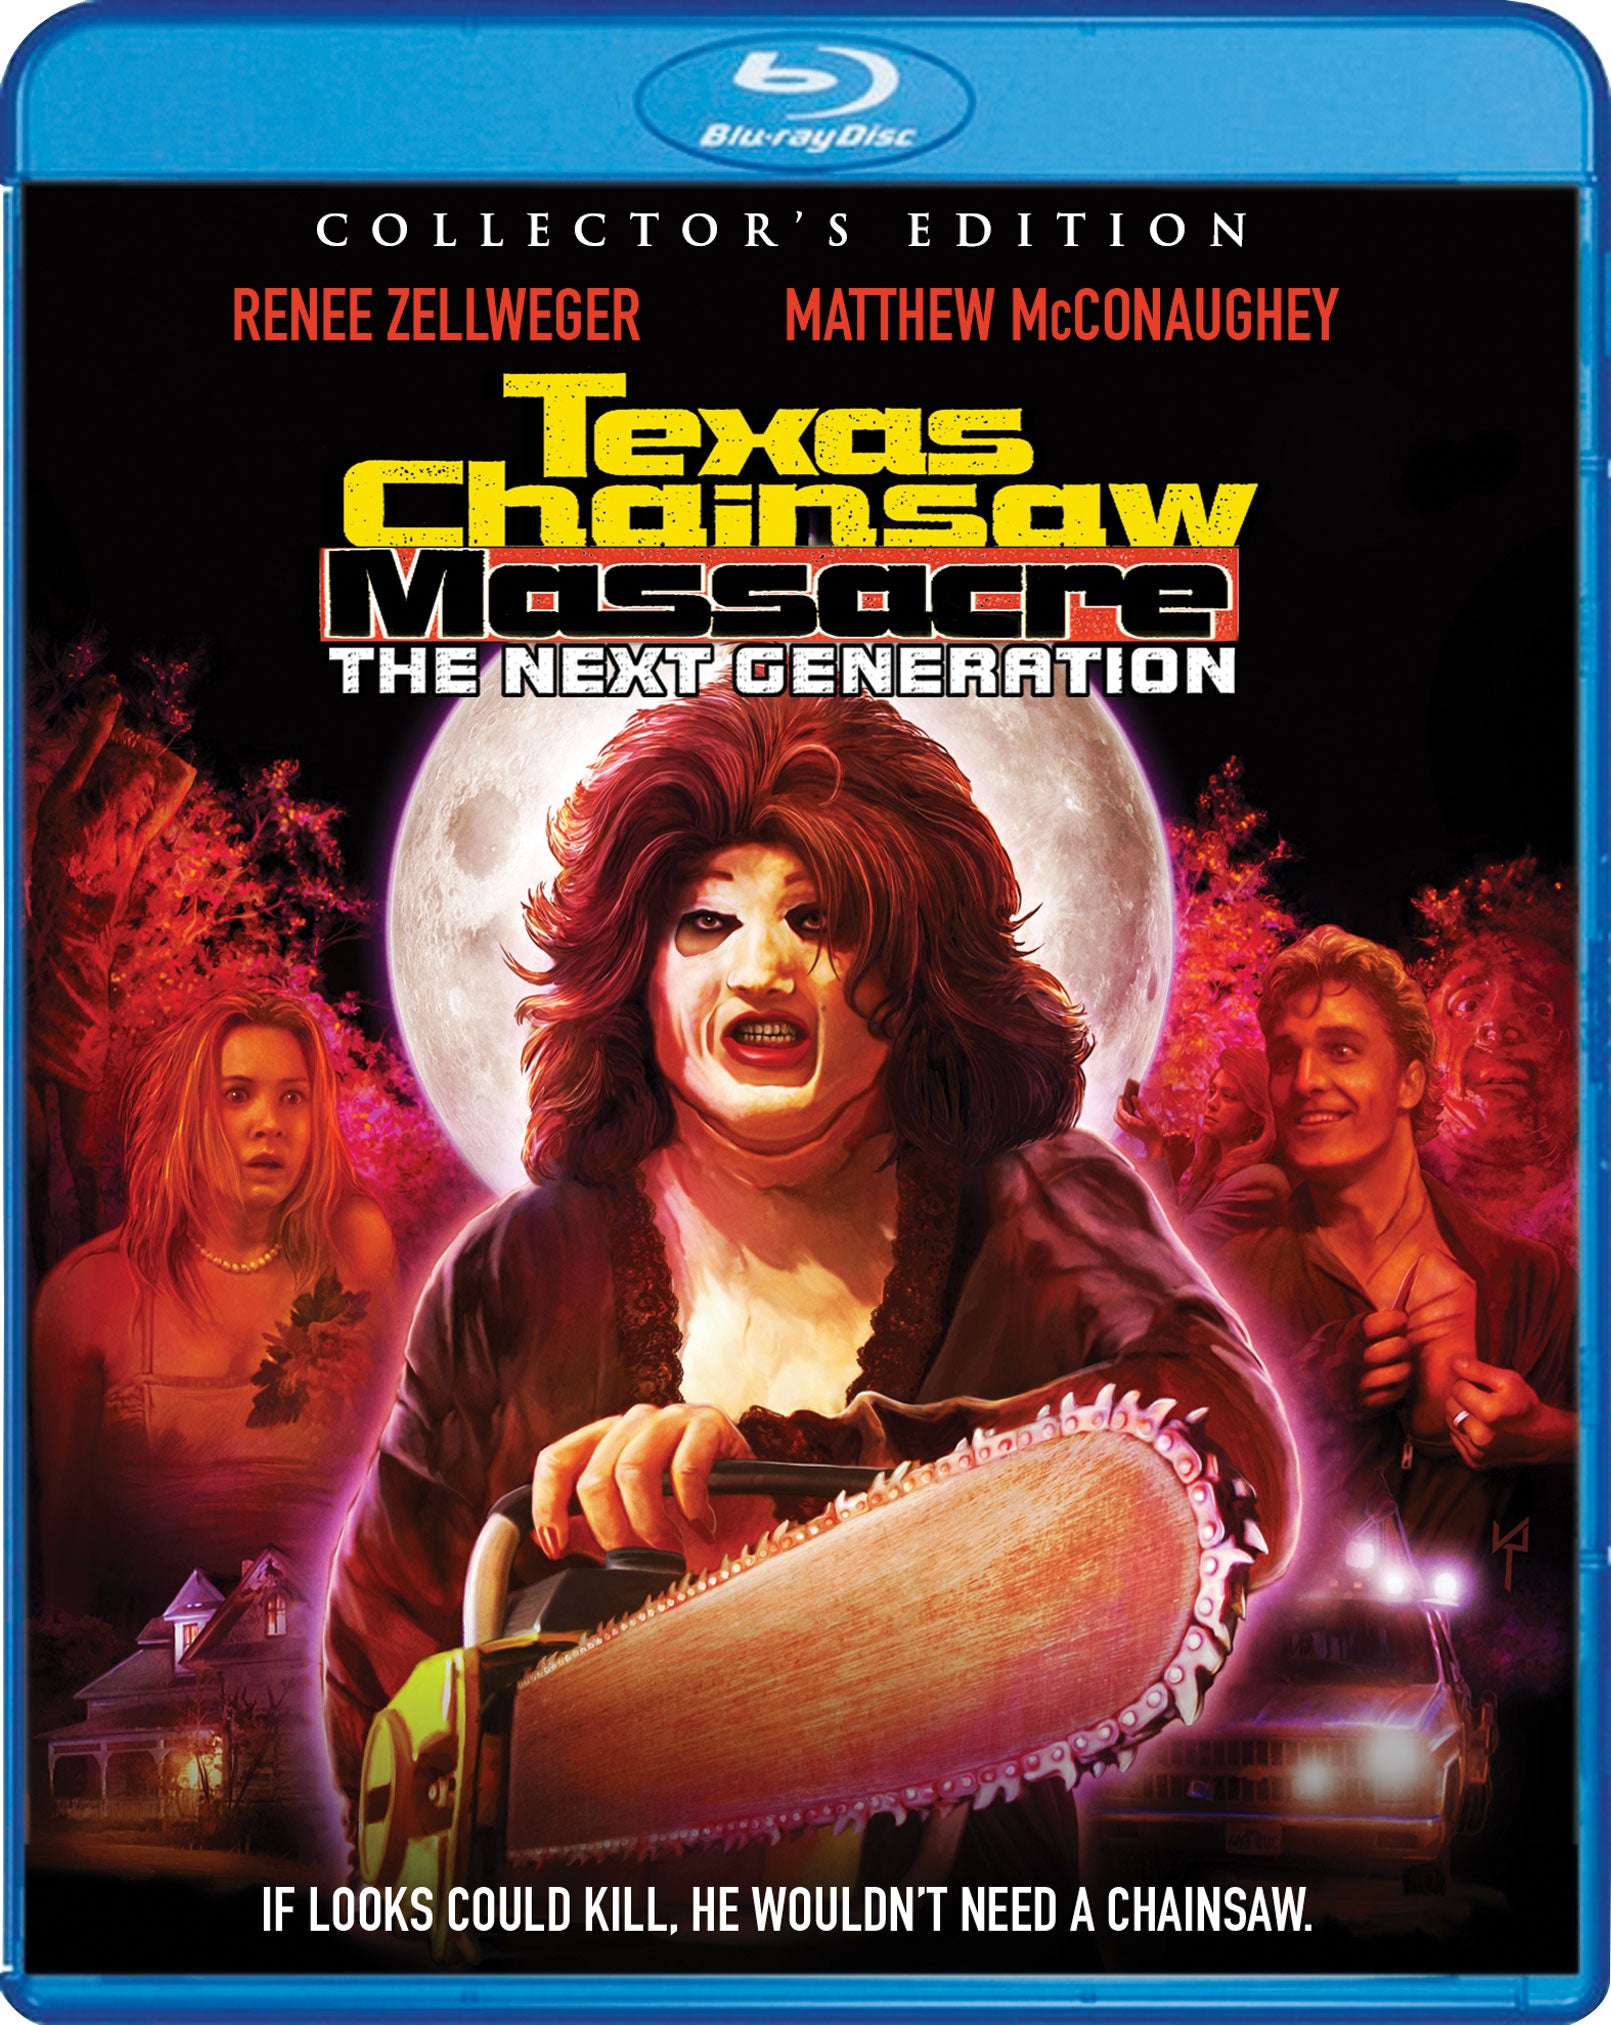 Texas Chainsaw Massacre: The Next Generation [Blu-ray] cover art